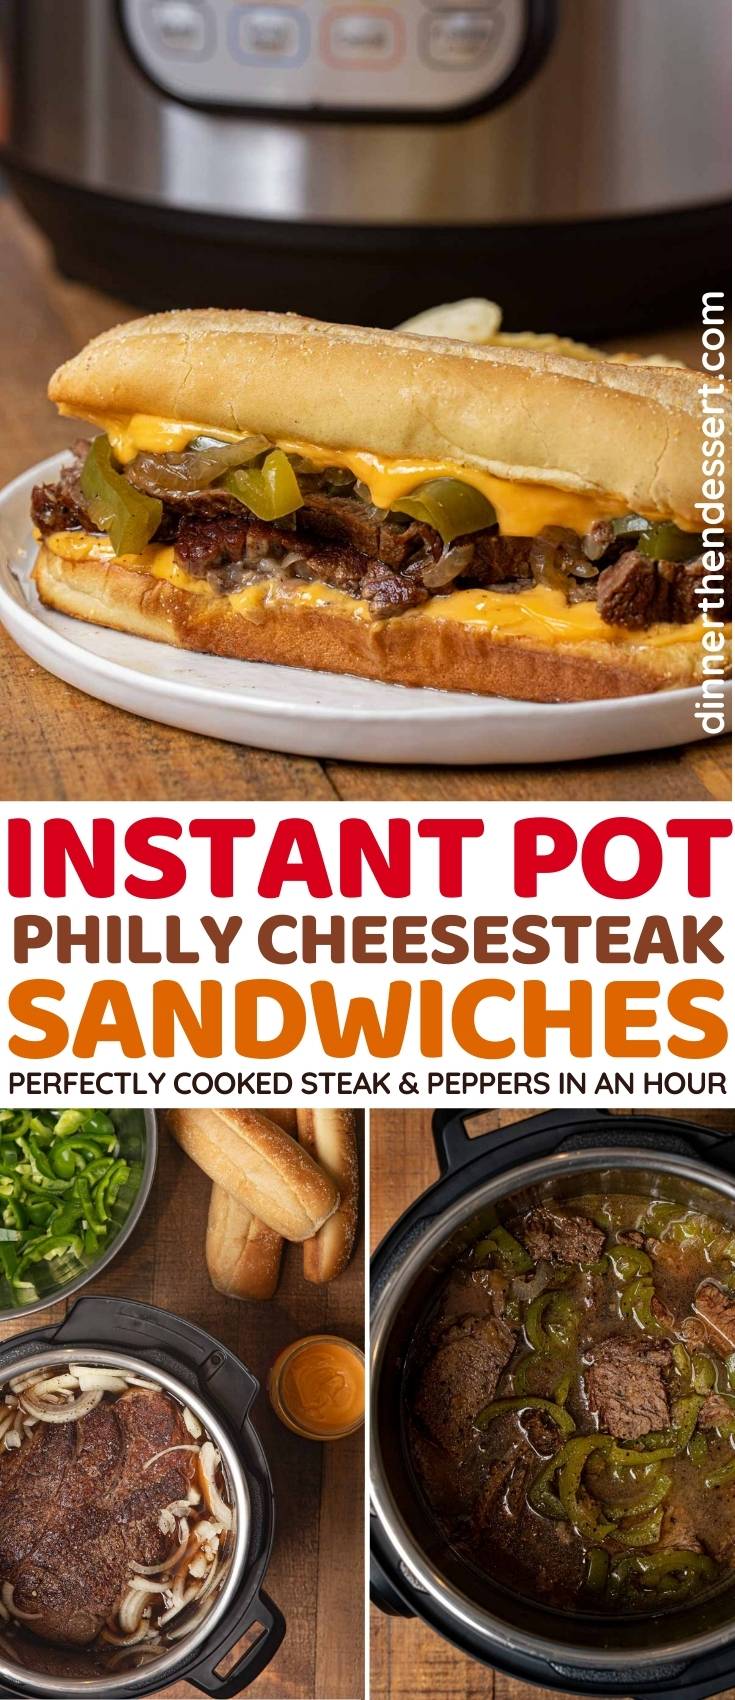 Instant Pot Philly Cheese Steak Sandwiches collage